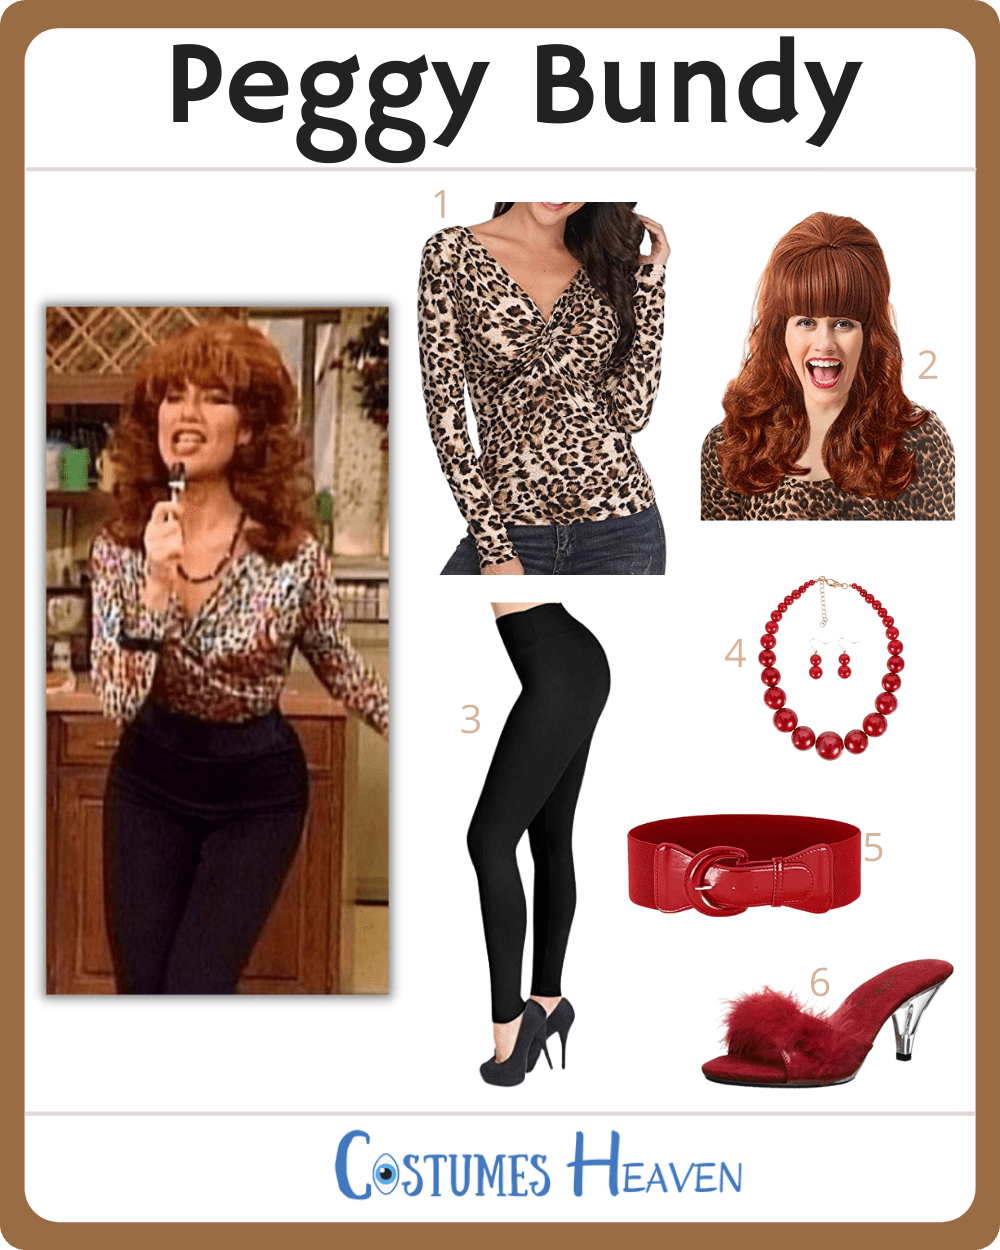 Images of peggy bundy